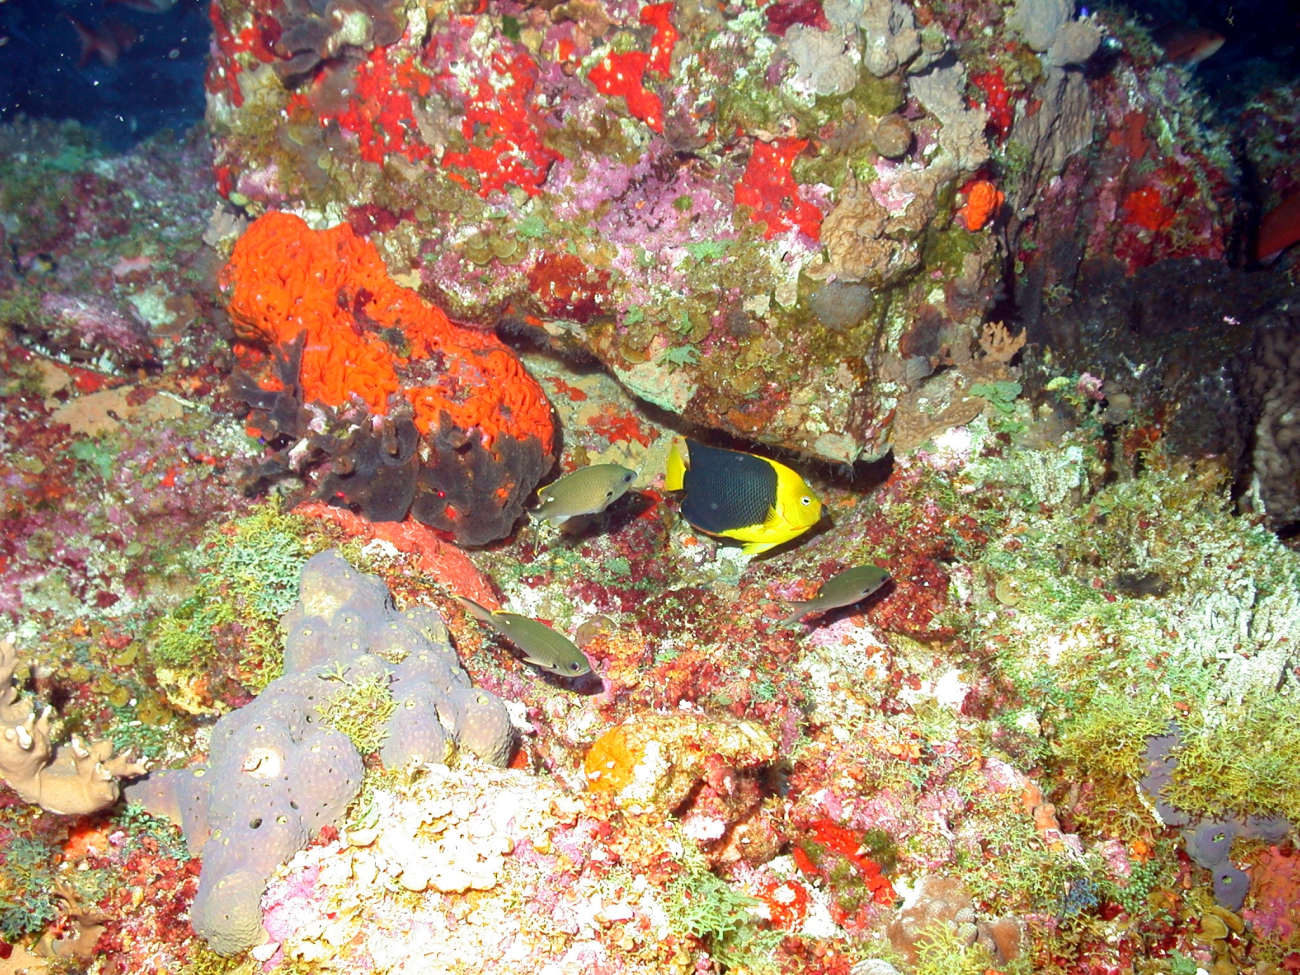 A rock beauty (Holocanthus tricolor) is the yellow and black fish in the centerof the image